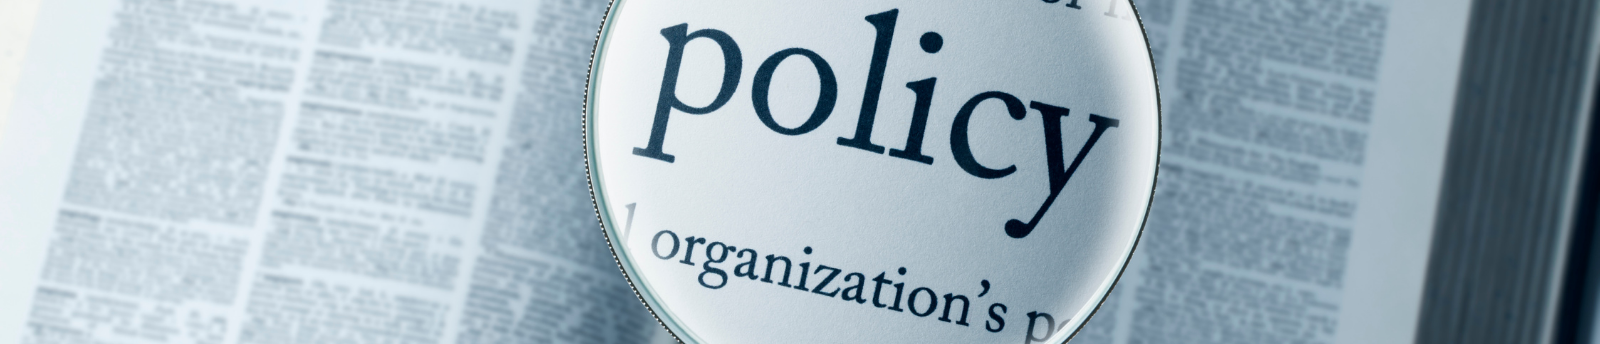 Policies and Committees